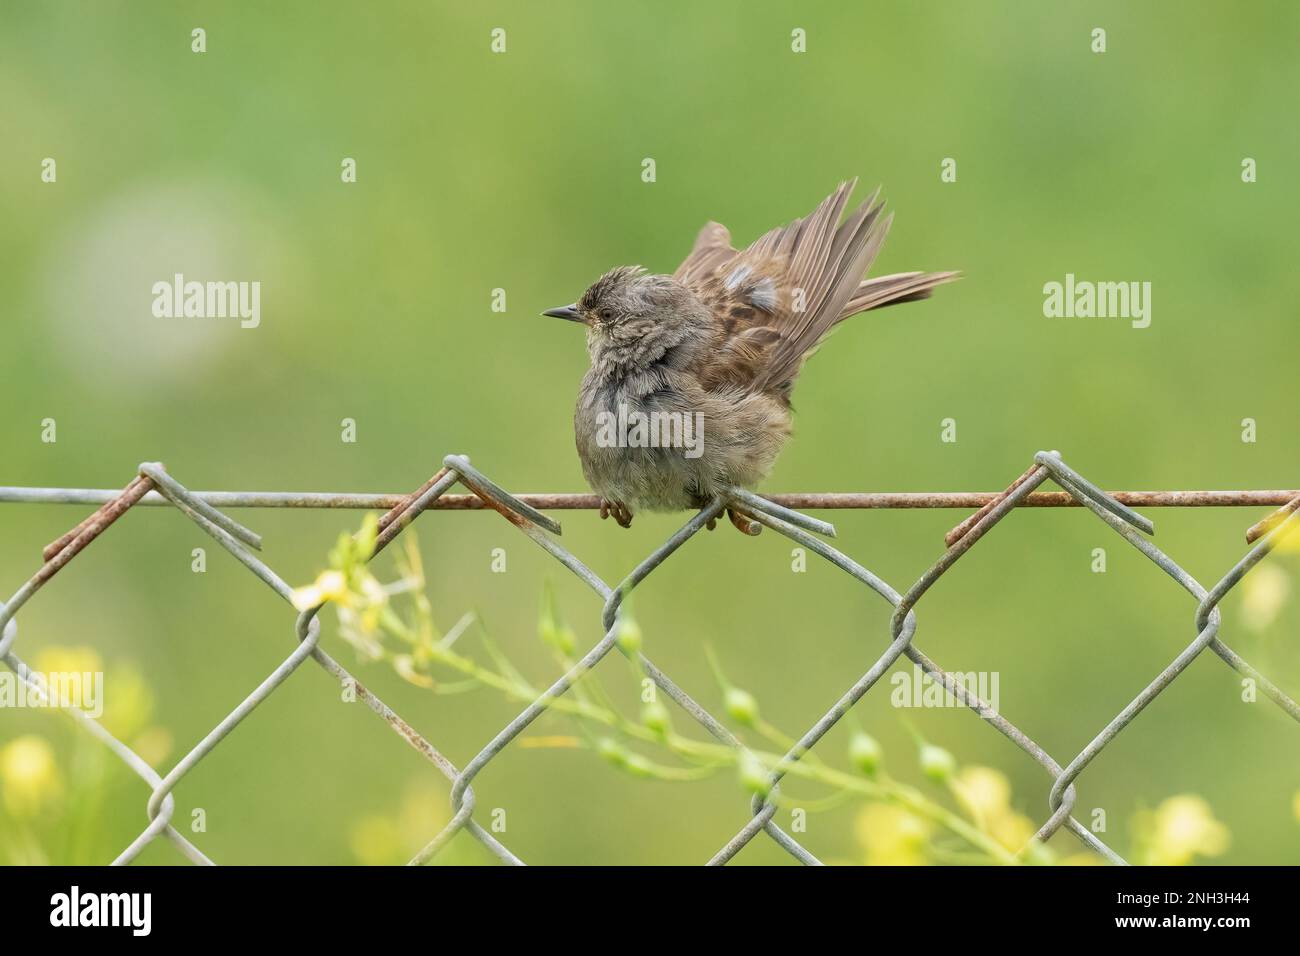 Juvenile Dunnock-Prunella modularis perched on wire fence. Stock Photo